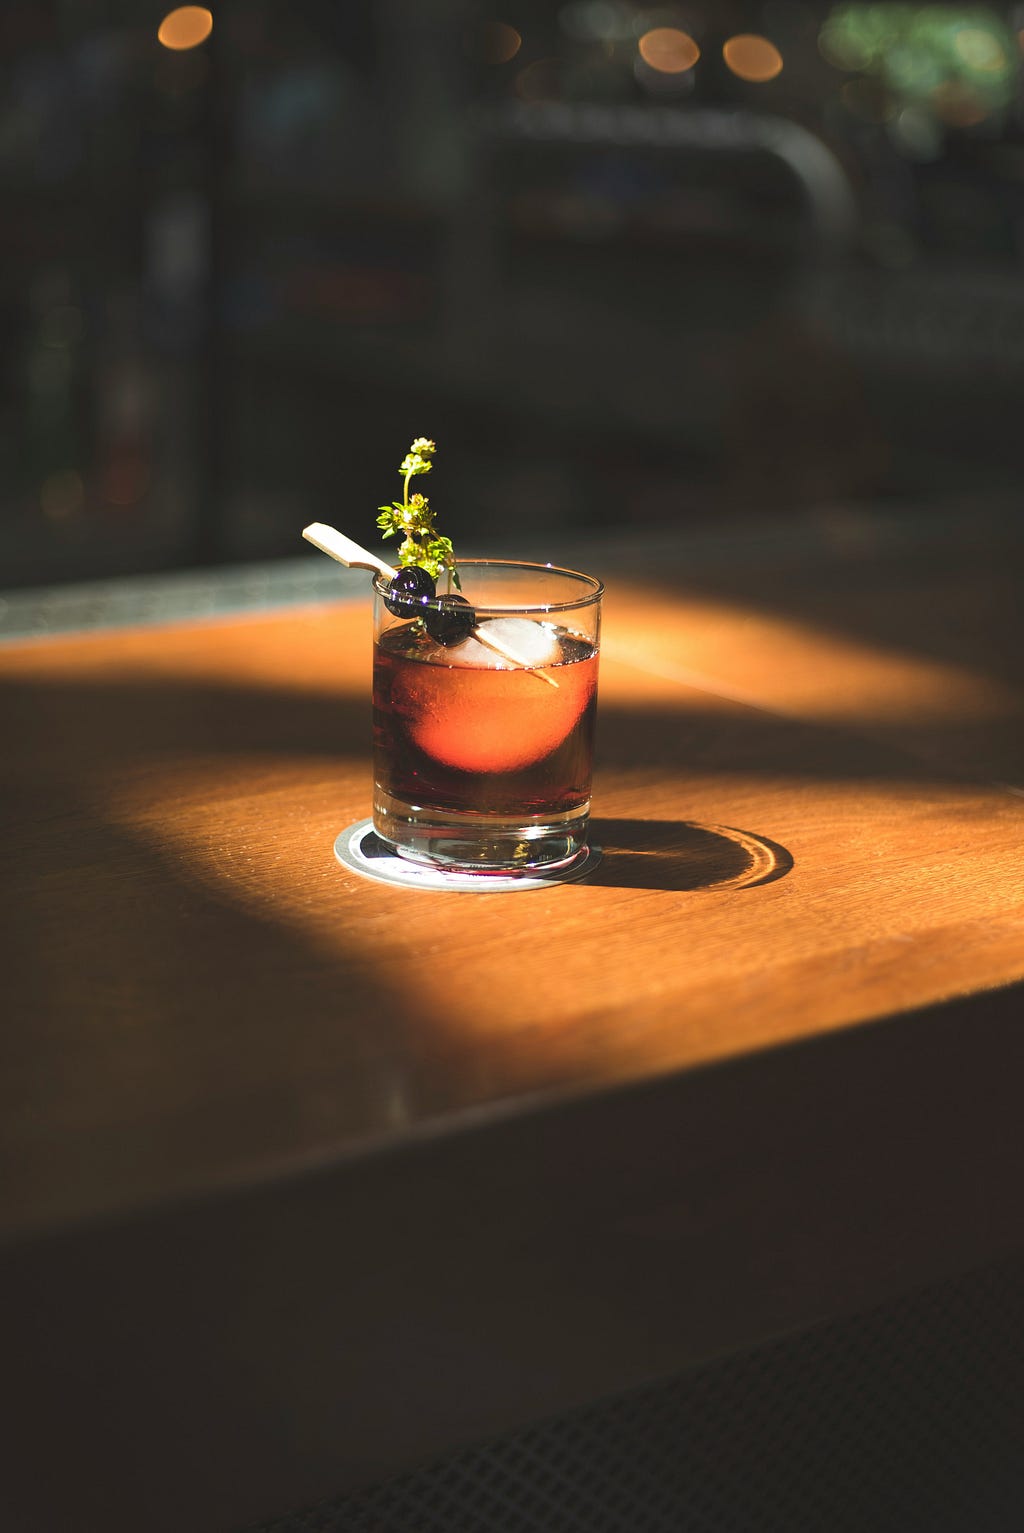 a glass with brown liquor garnished with cherries and a sprig of an herb